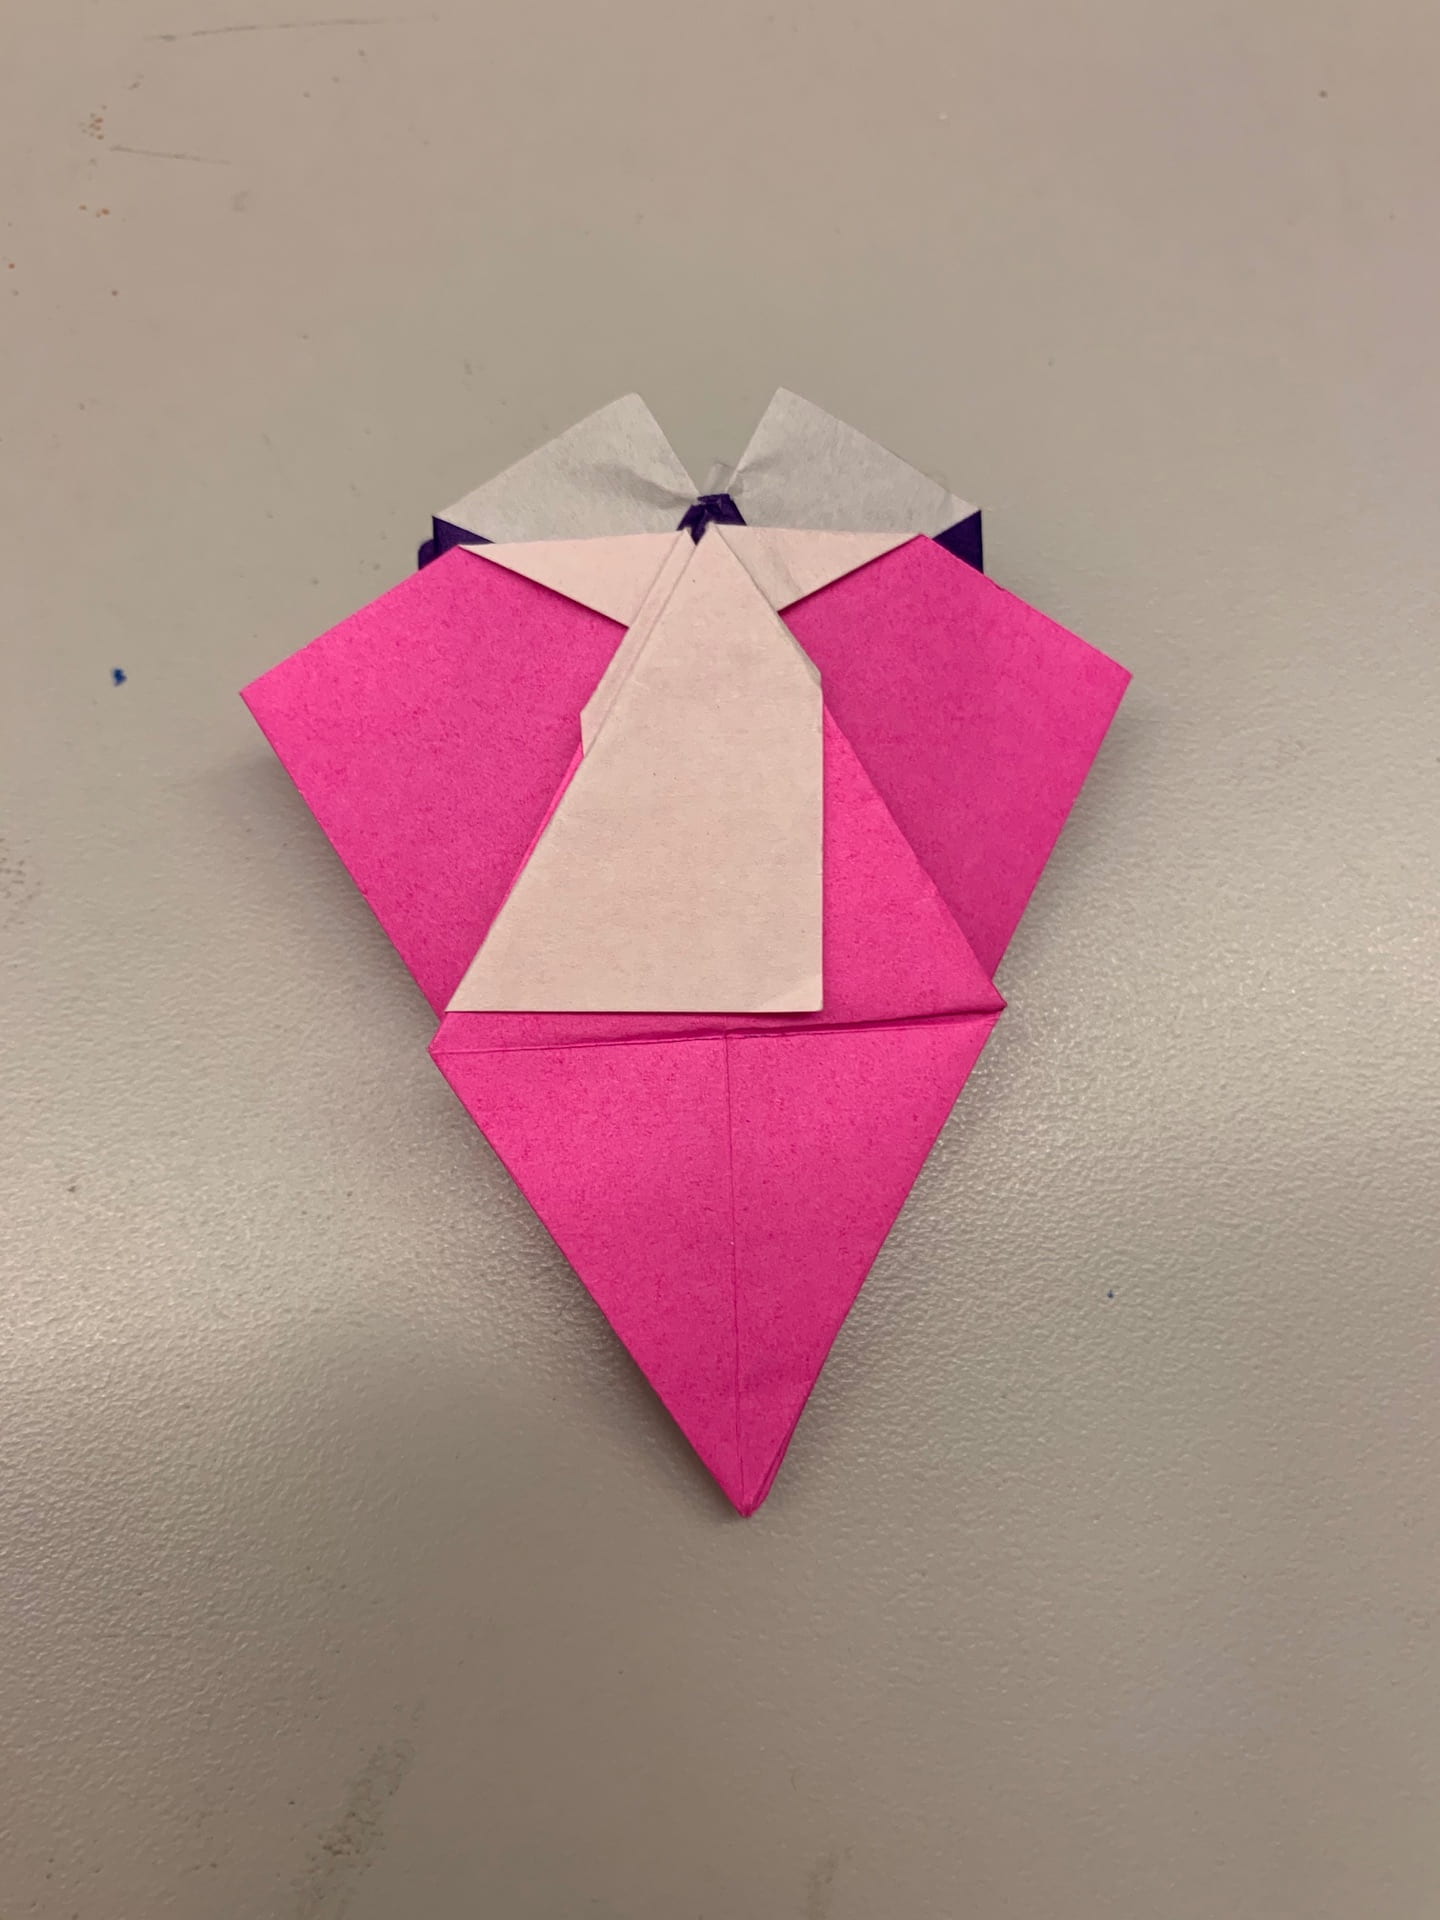 Drawing and Imaging: Origami “Something Inside of Something”